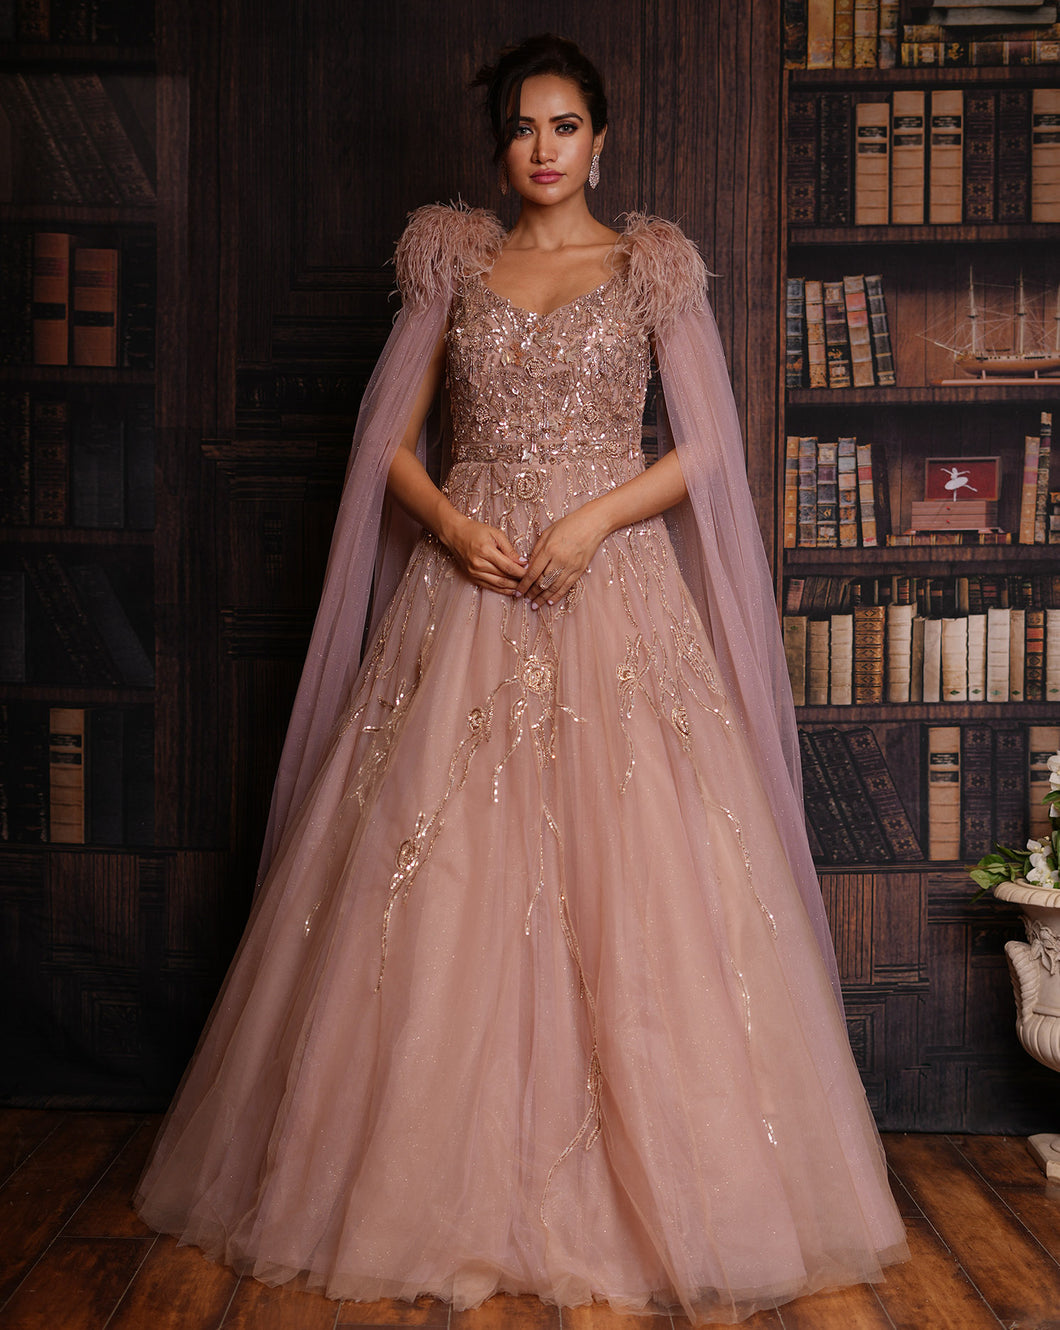 The Isabella Rose Gown